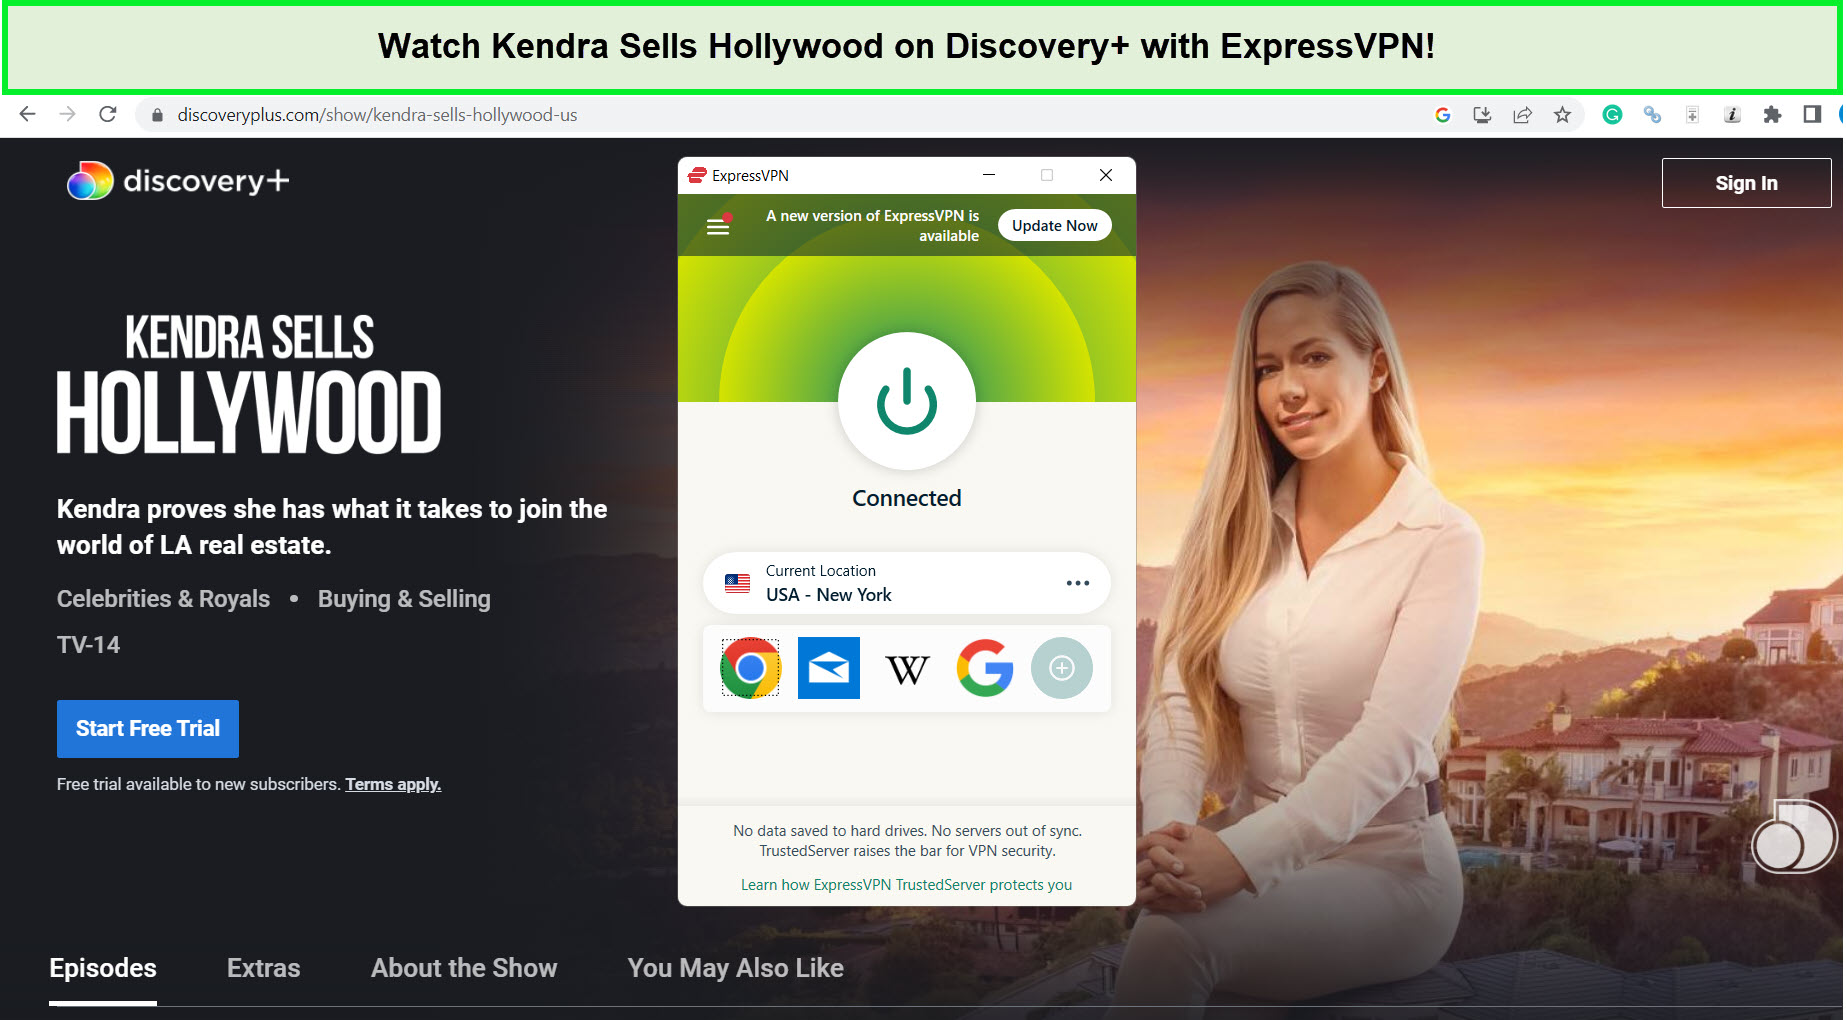 expressvpn-unblocks-kendra-sells-hollywood-on-discovery-plus-outside-USA